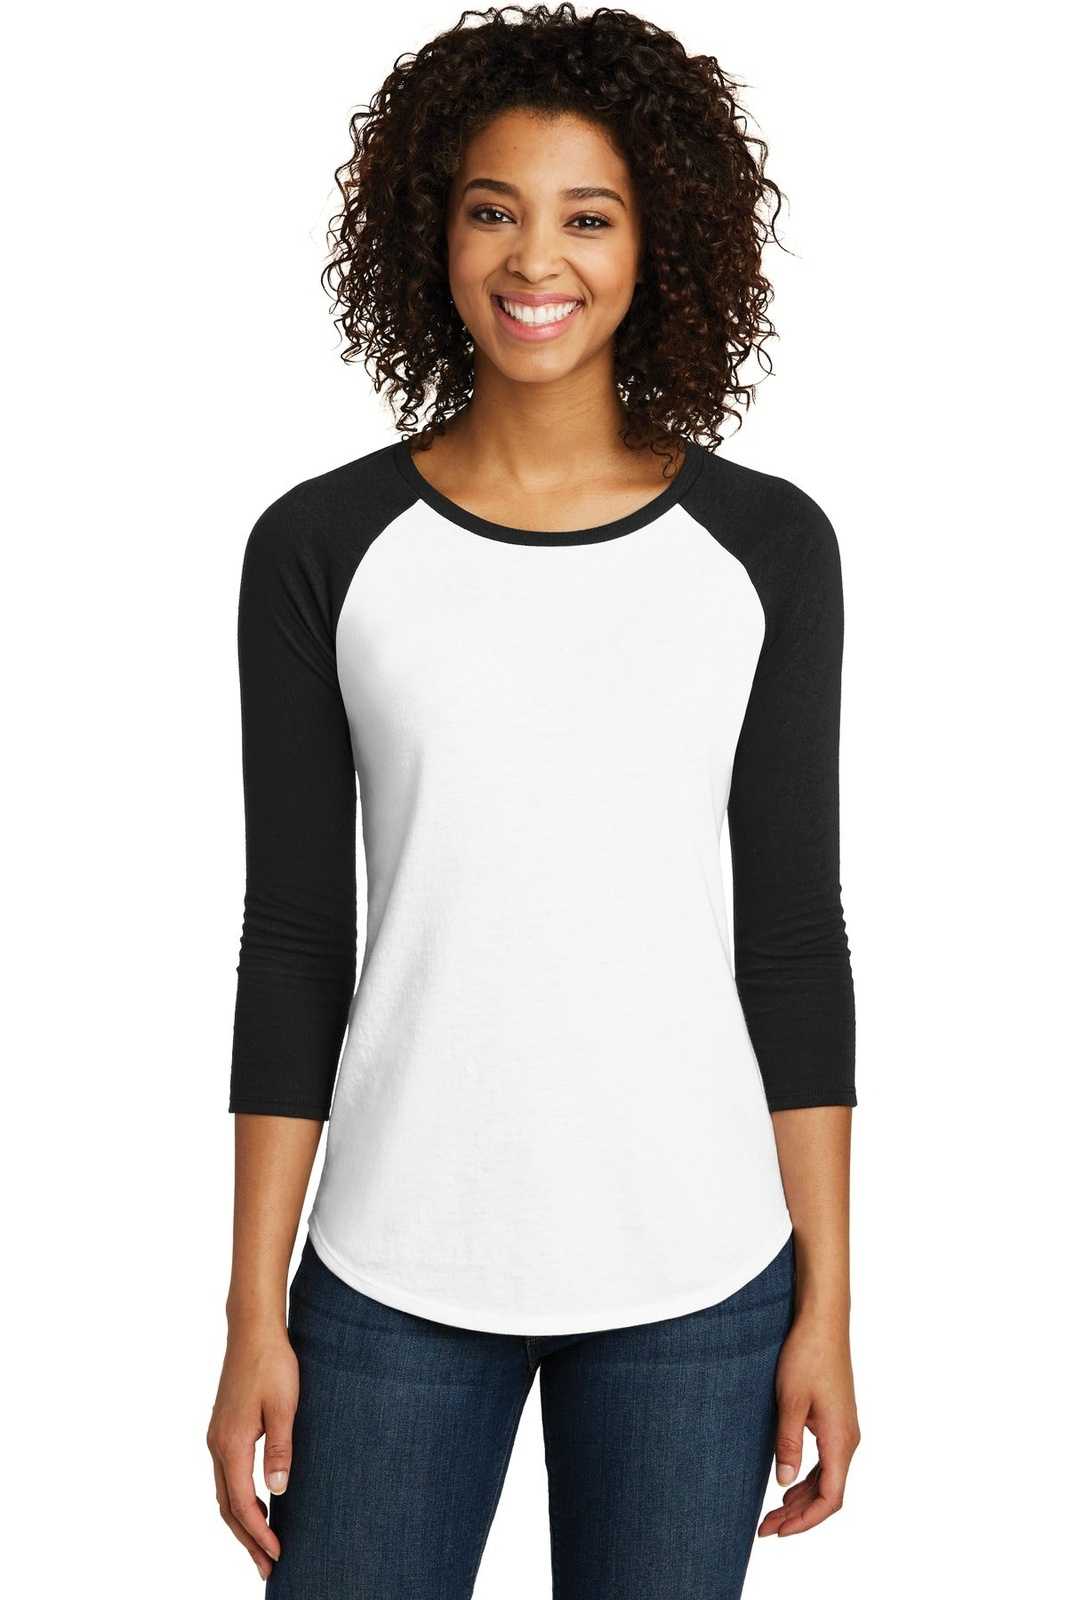 District DT6211 Women's Fitted Very Important Tee 3/4-Sleeve Raglan - Black White - HIT a Double - 1